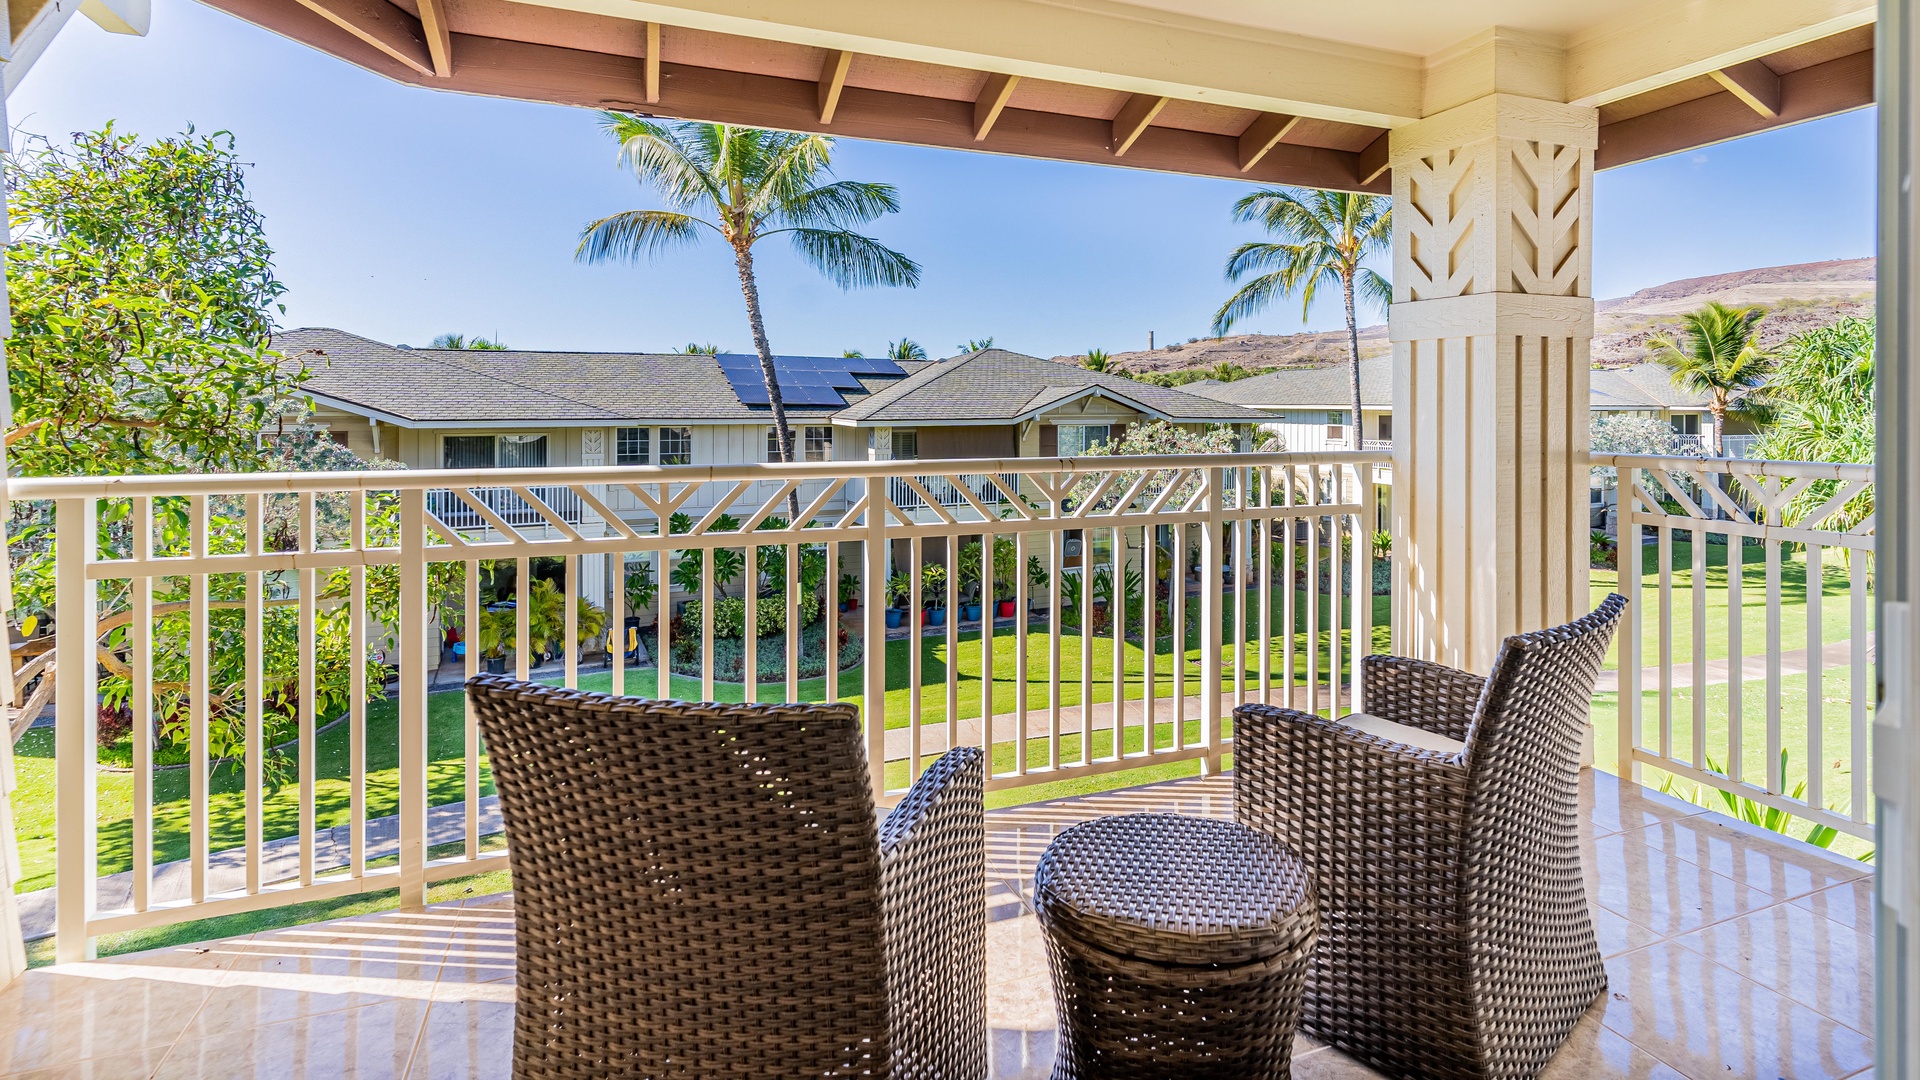 Kapolei Vacation Rentals, Ko Olina Kai 1033C - The upstairs lanai connected with the primary guest bedroom.